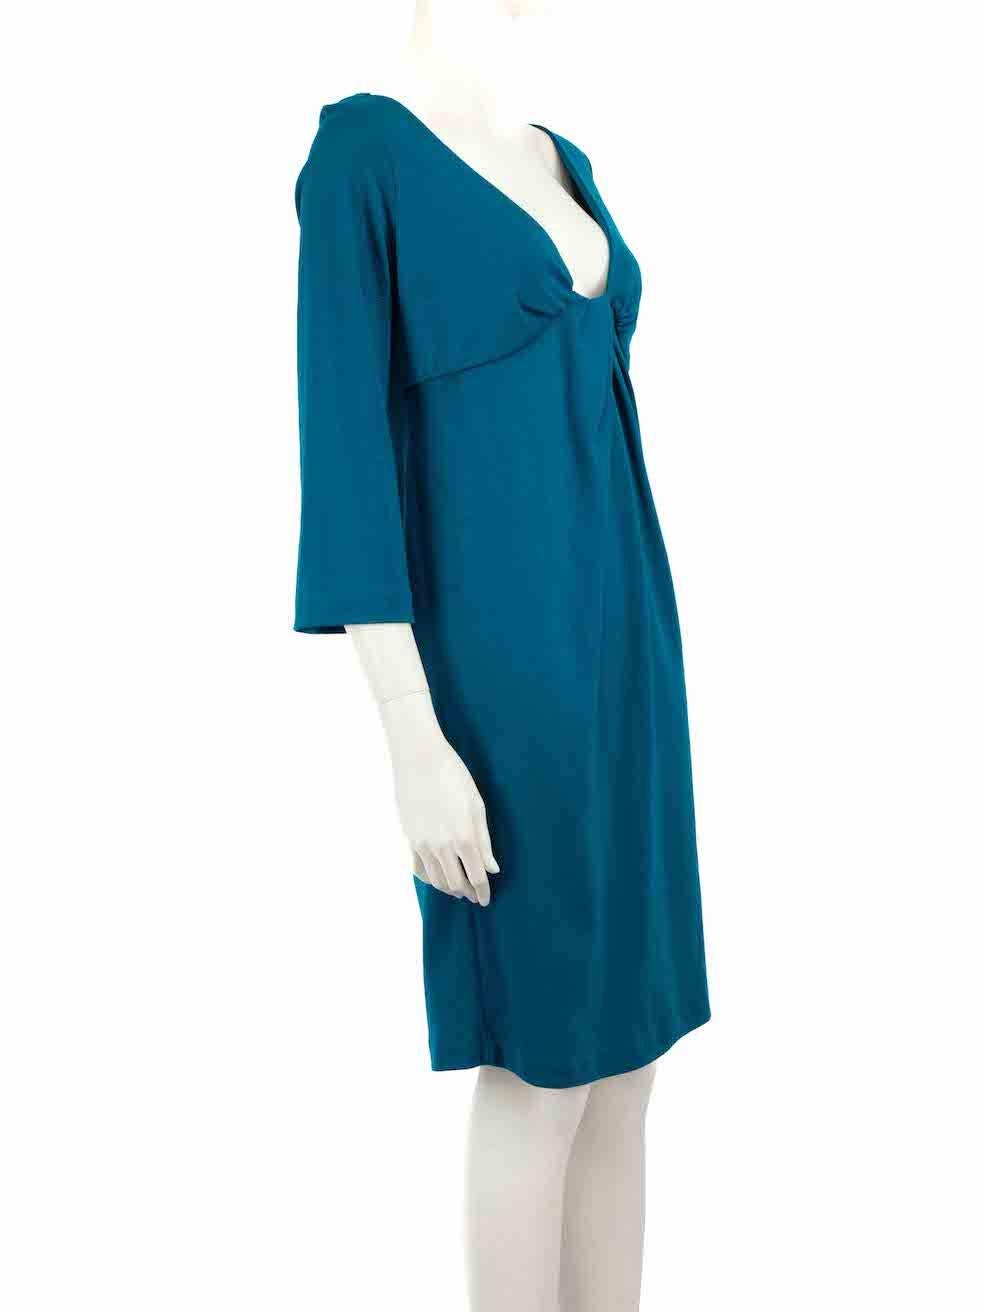 CONDITION is Very good. Minimal wear to dress is evident. Minimal wear to the front with a small mark and hole to the wool on this used Diane Von Furstenberg designer resale item.
 
 
 
 Details
 
 
 Blue
 
 Wool
 
 Dress
 
 Knee length
 
 Long